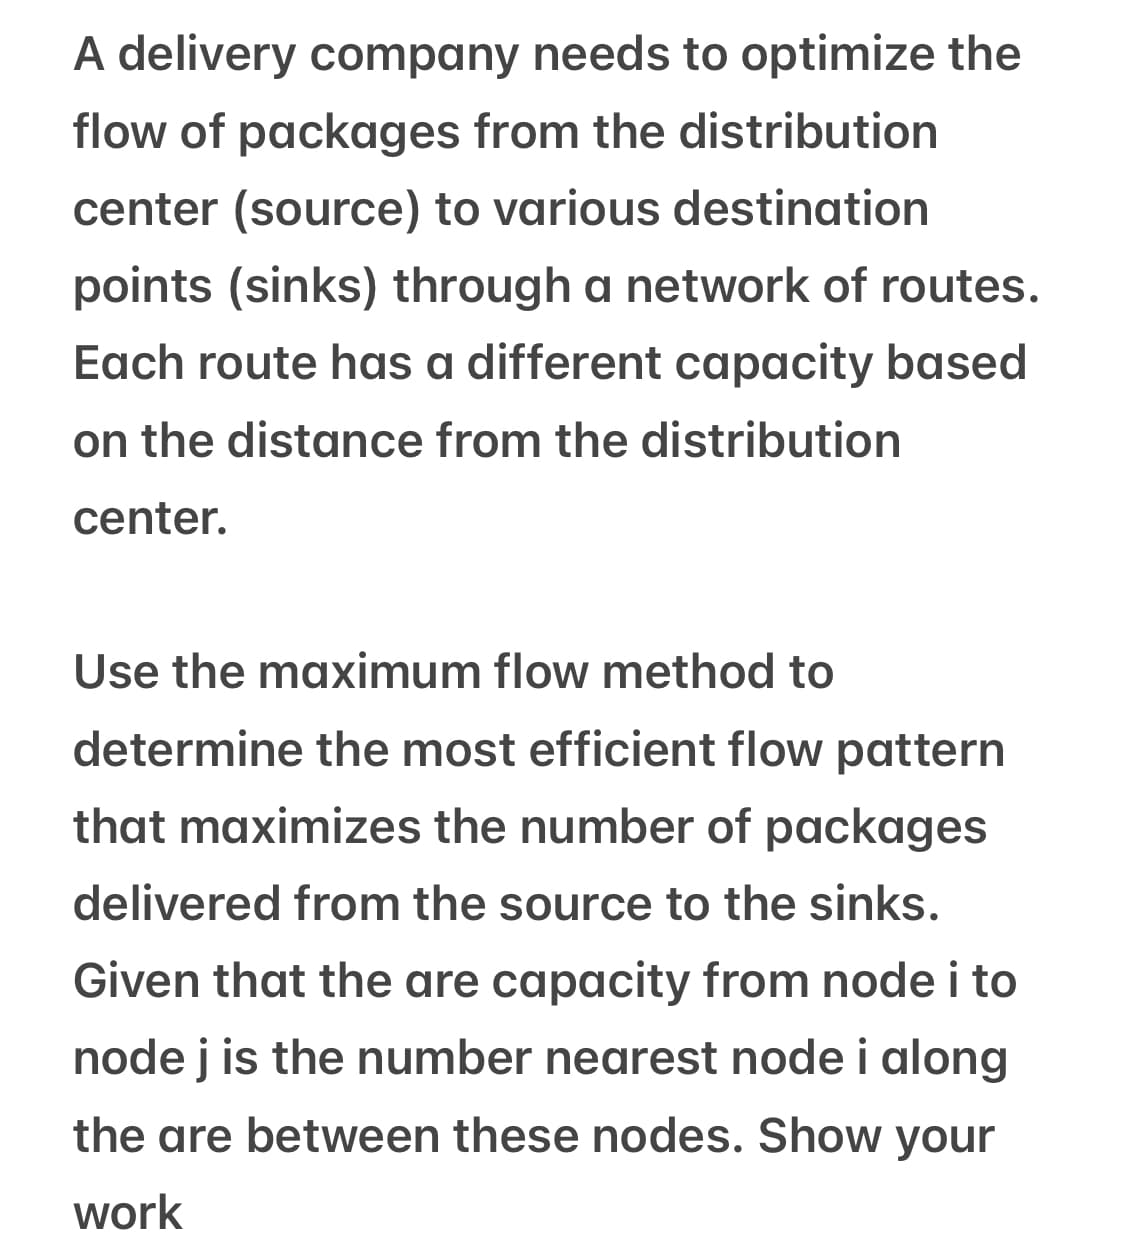 A delivery company needs to optimize the
flow of packages from the distribution
center (source) to various destination
points (sinks) through a network of routes.
Each route has a different capacity based
on the distance from the distribution
center.
Use the maximum flow method to
determine the most efficient flow pattern
that maximizes the number of packages
delivered from the source to the sinks.
Given that the are capacity from node i to
node j is the number nearest node i along
the are between these nodes. Show your
work